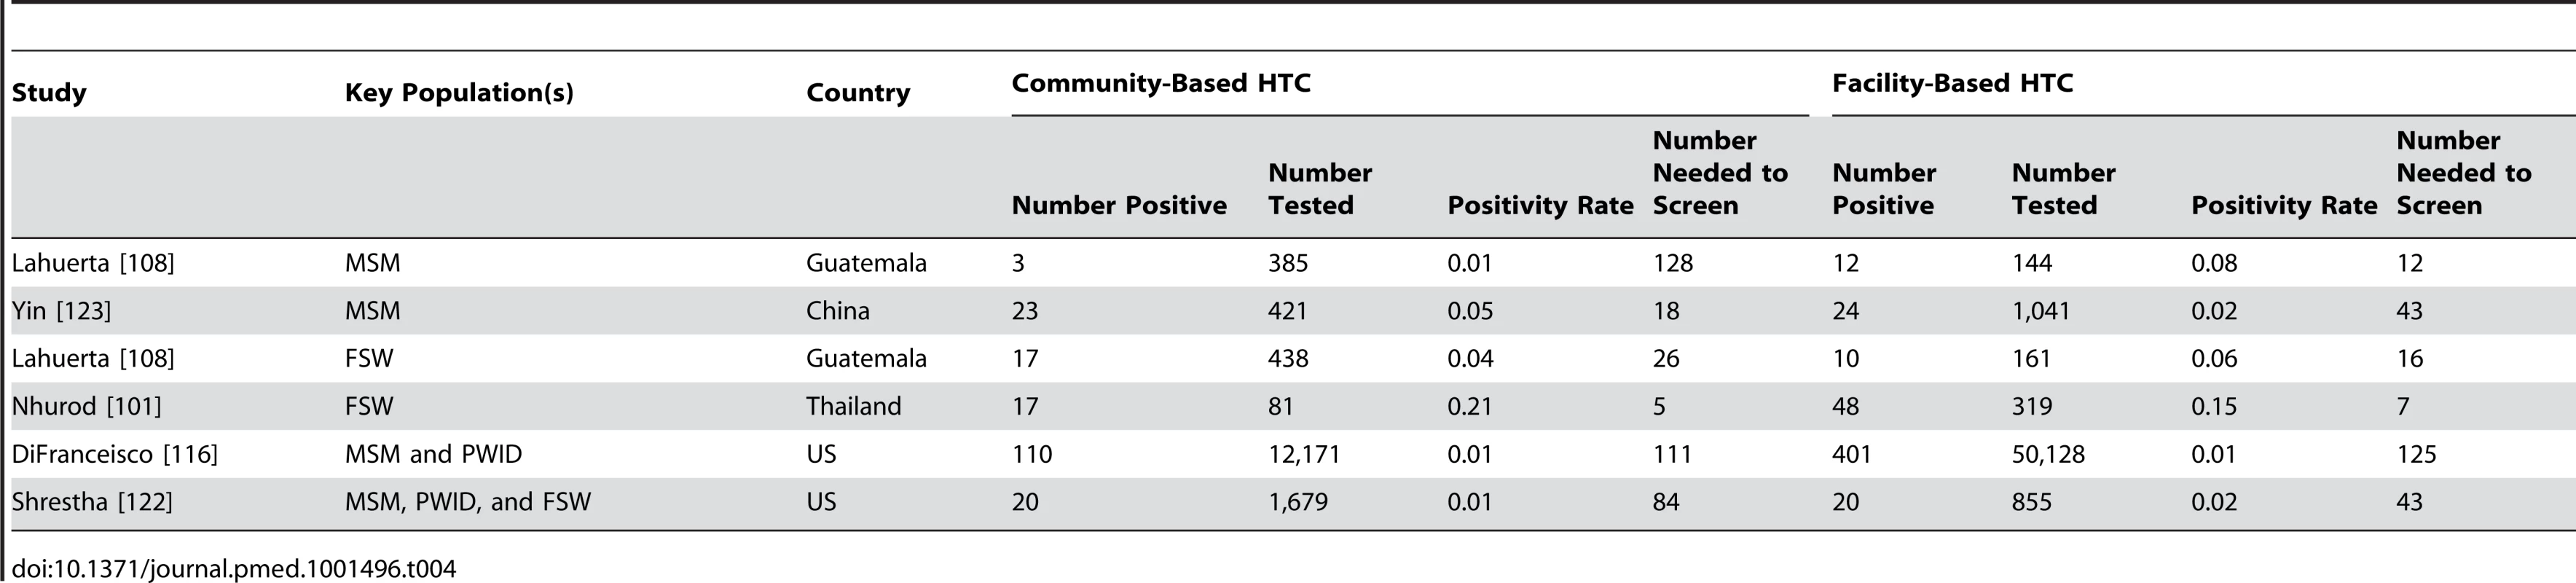 Number needed to screen to identify a person with HIV in studies offering community- and facility-based HTC to key populations.